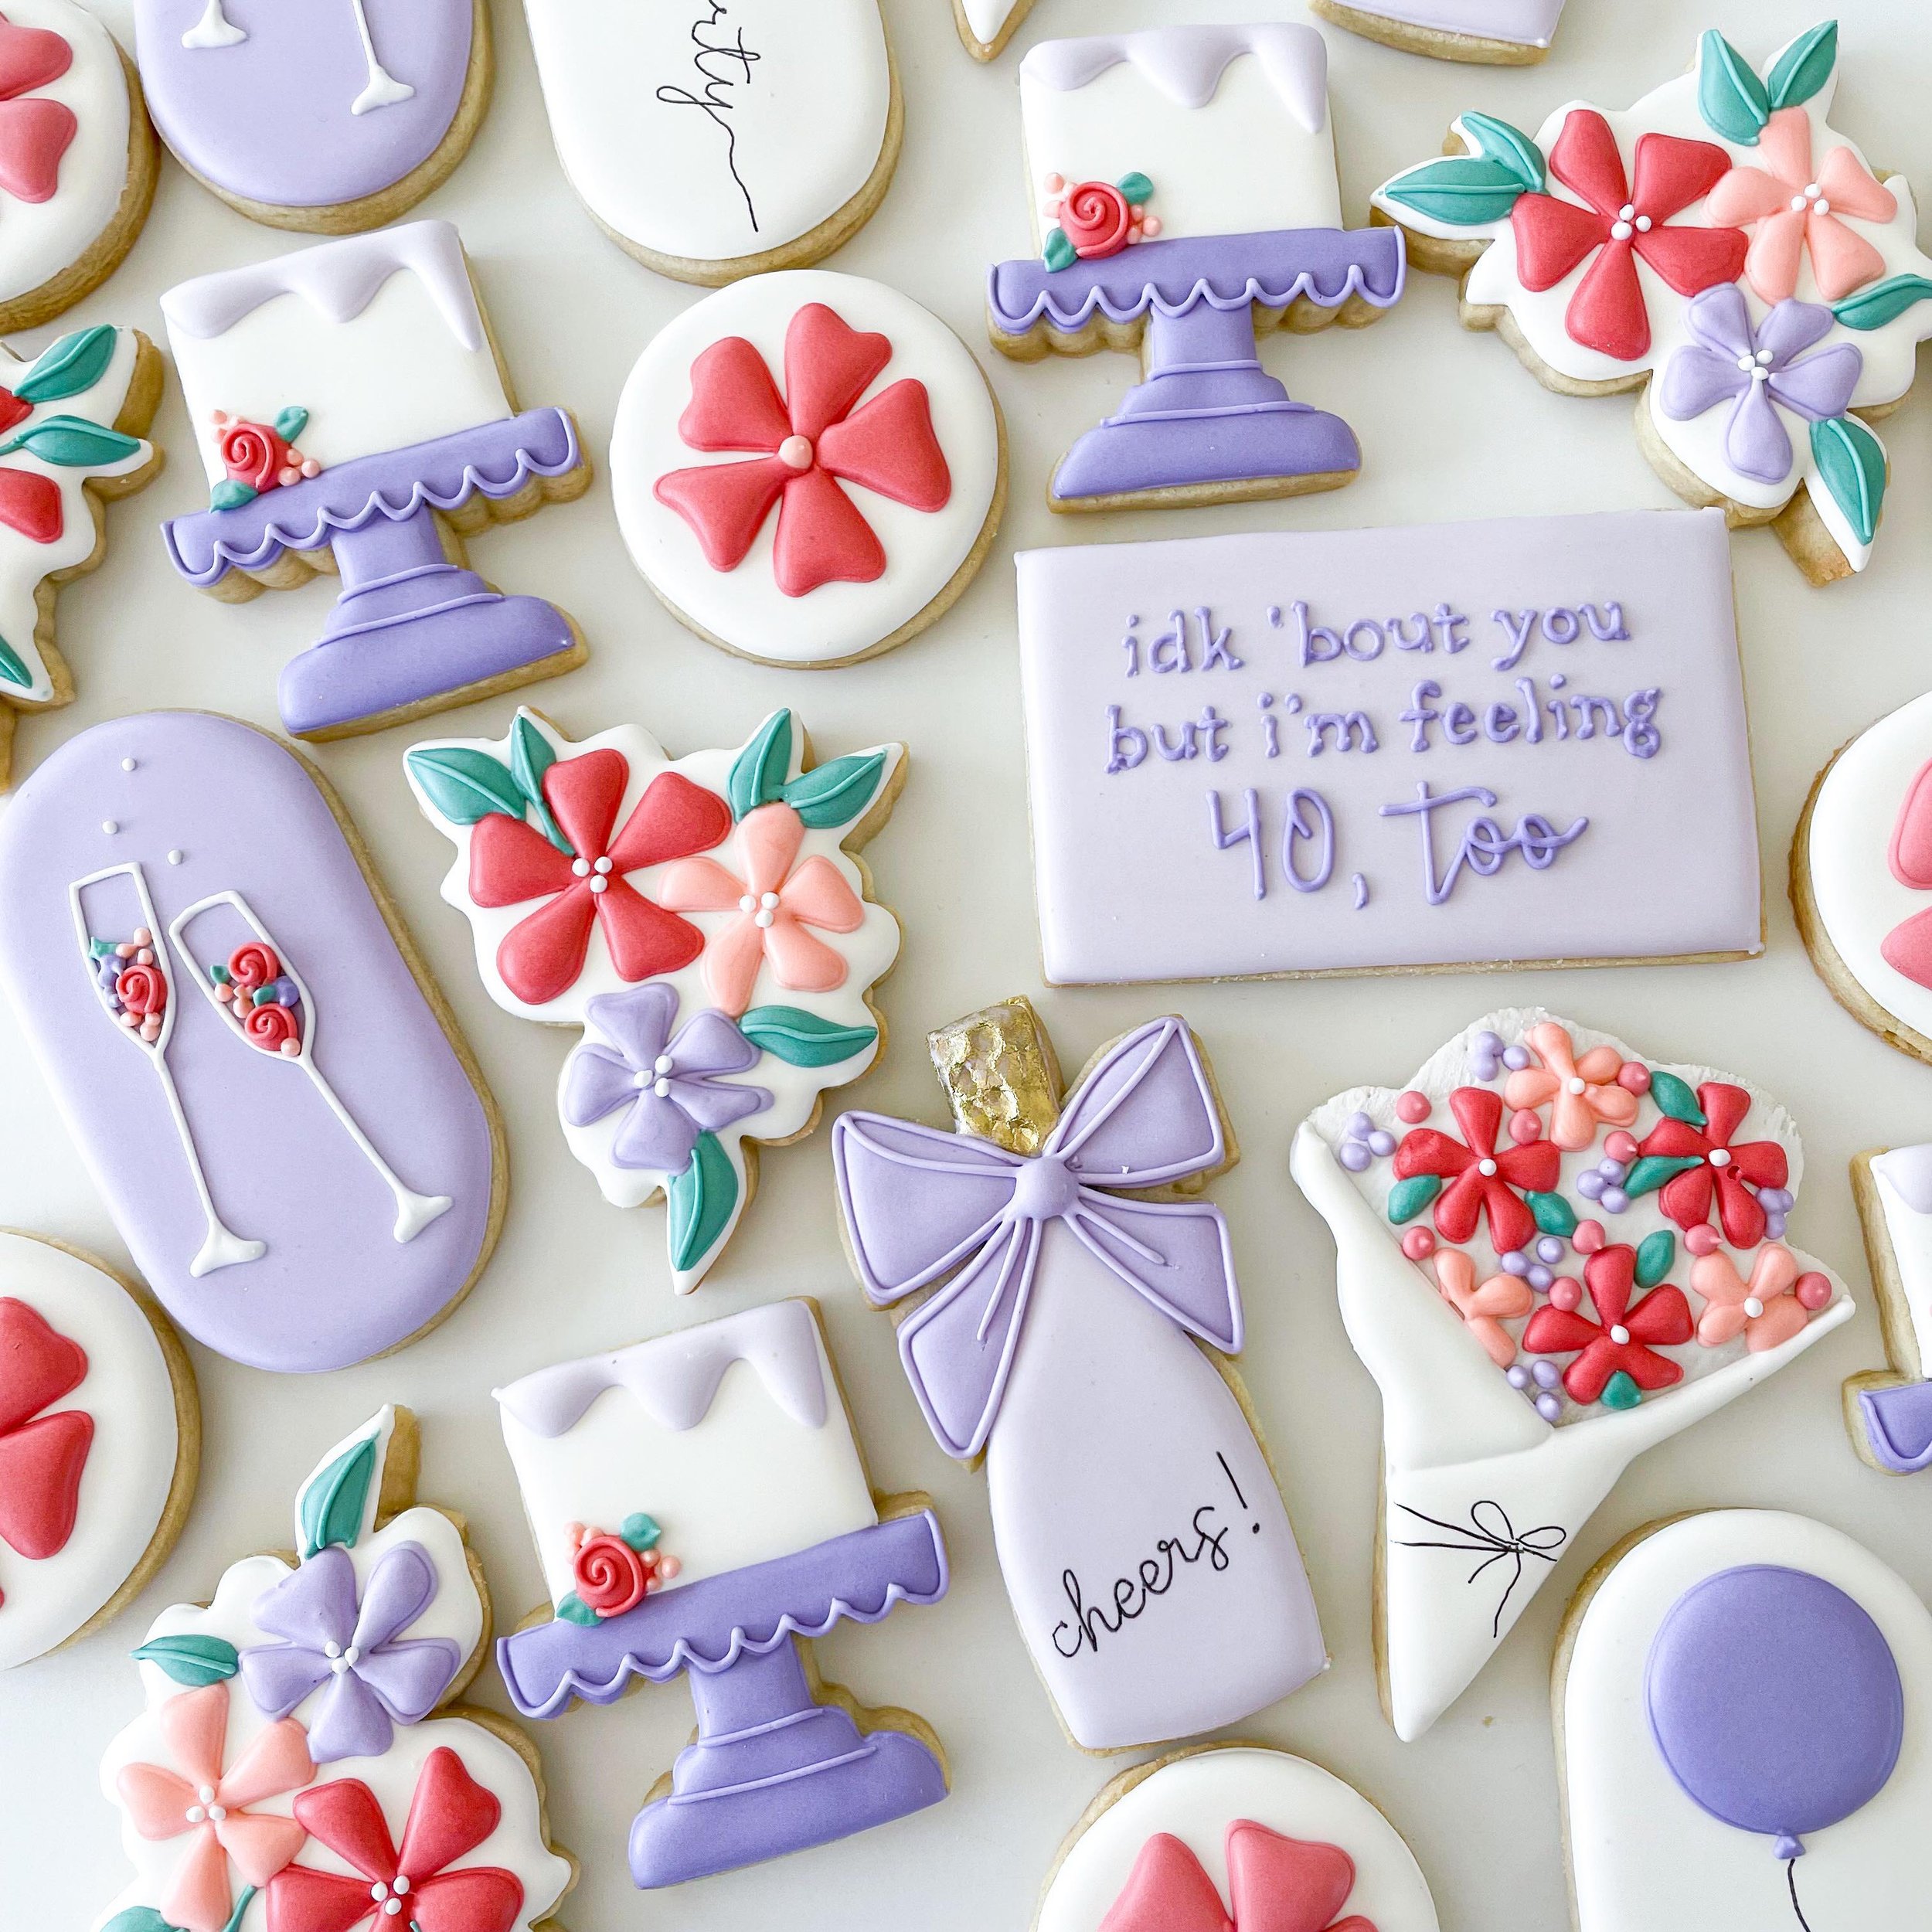 Idk bout you but I&rsquo;m feeling forty two! Love that line from this fun birthday set. 

#birthdaycookies #flowercookies